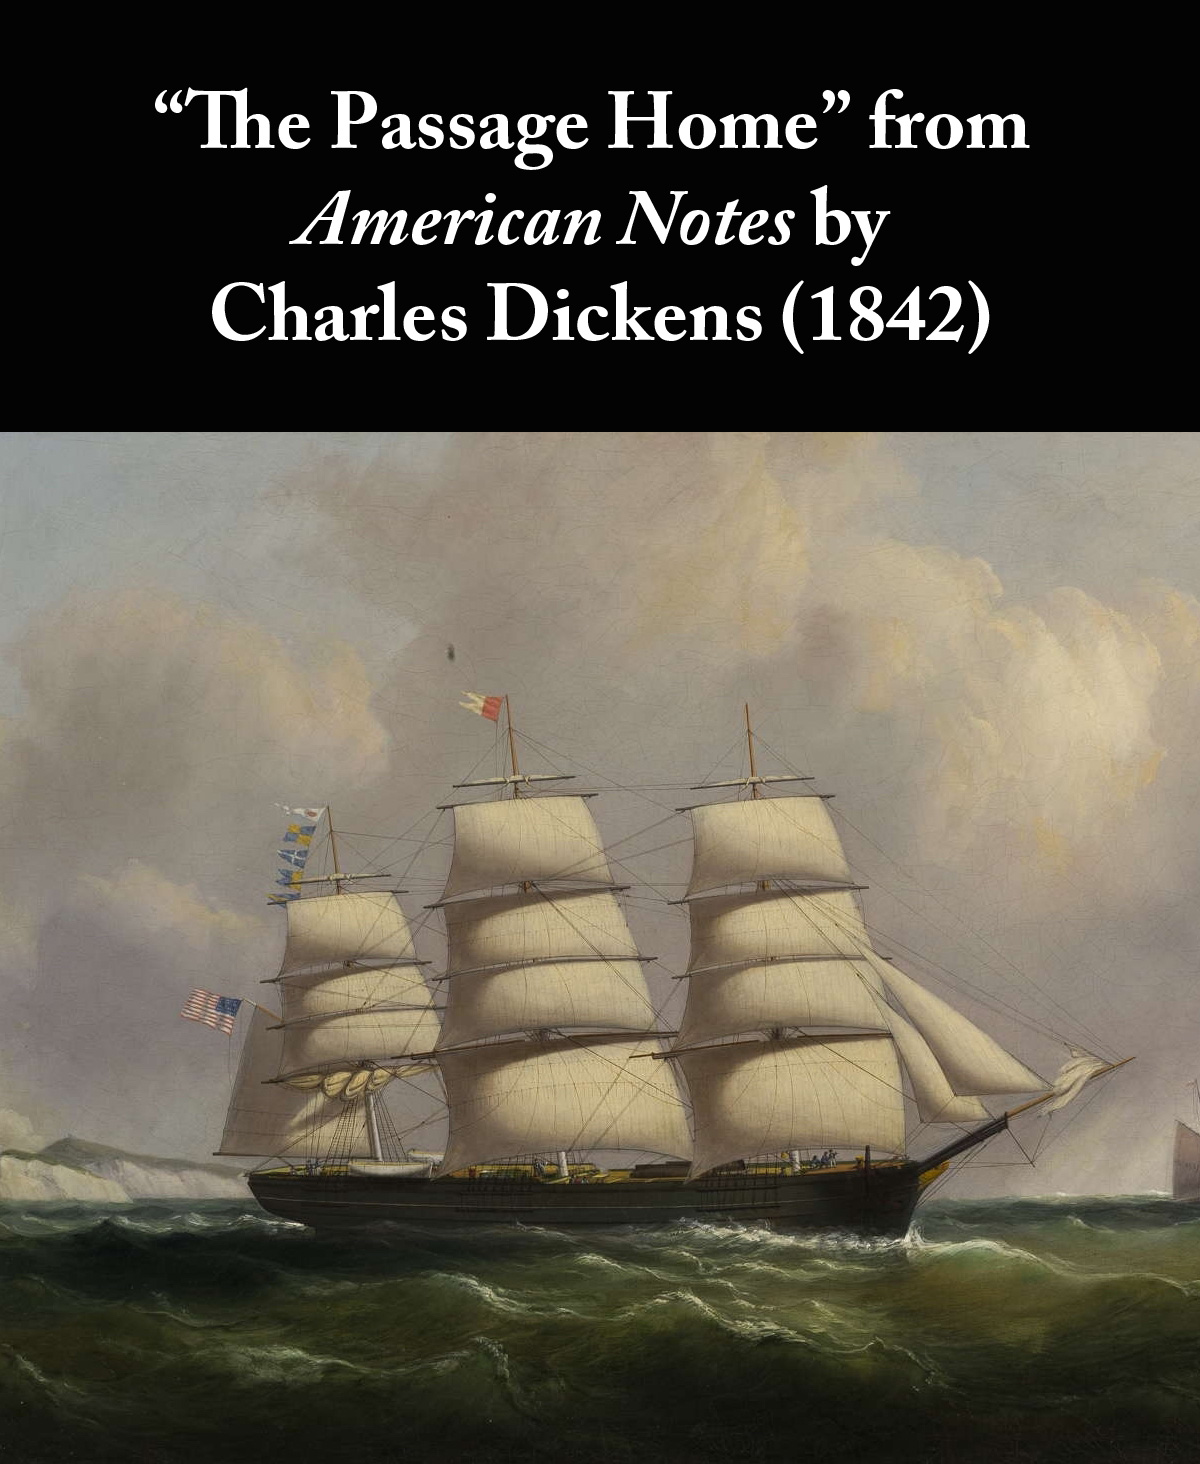 The Passage Home from American Notes by Charles Dickens (1842)